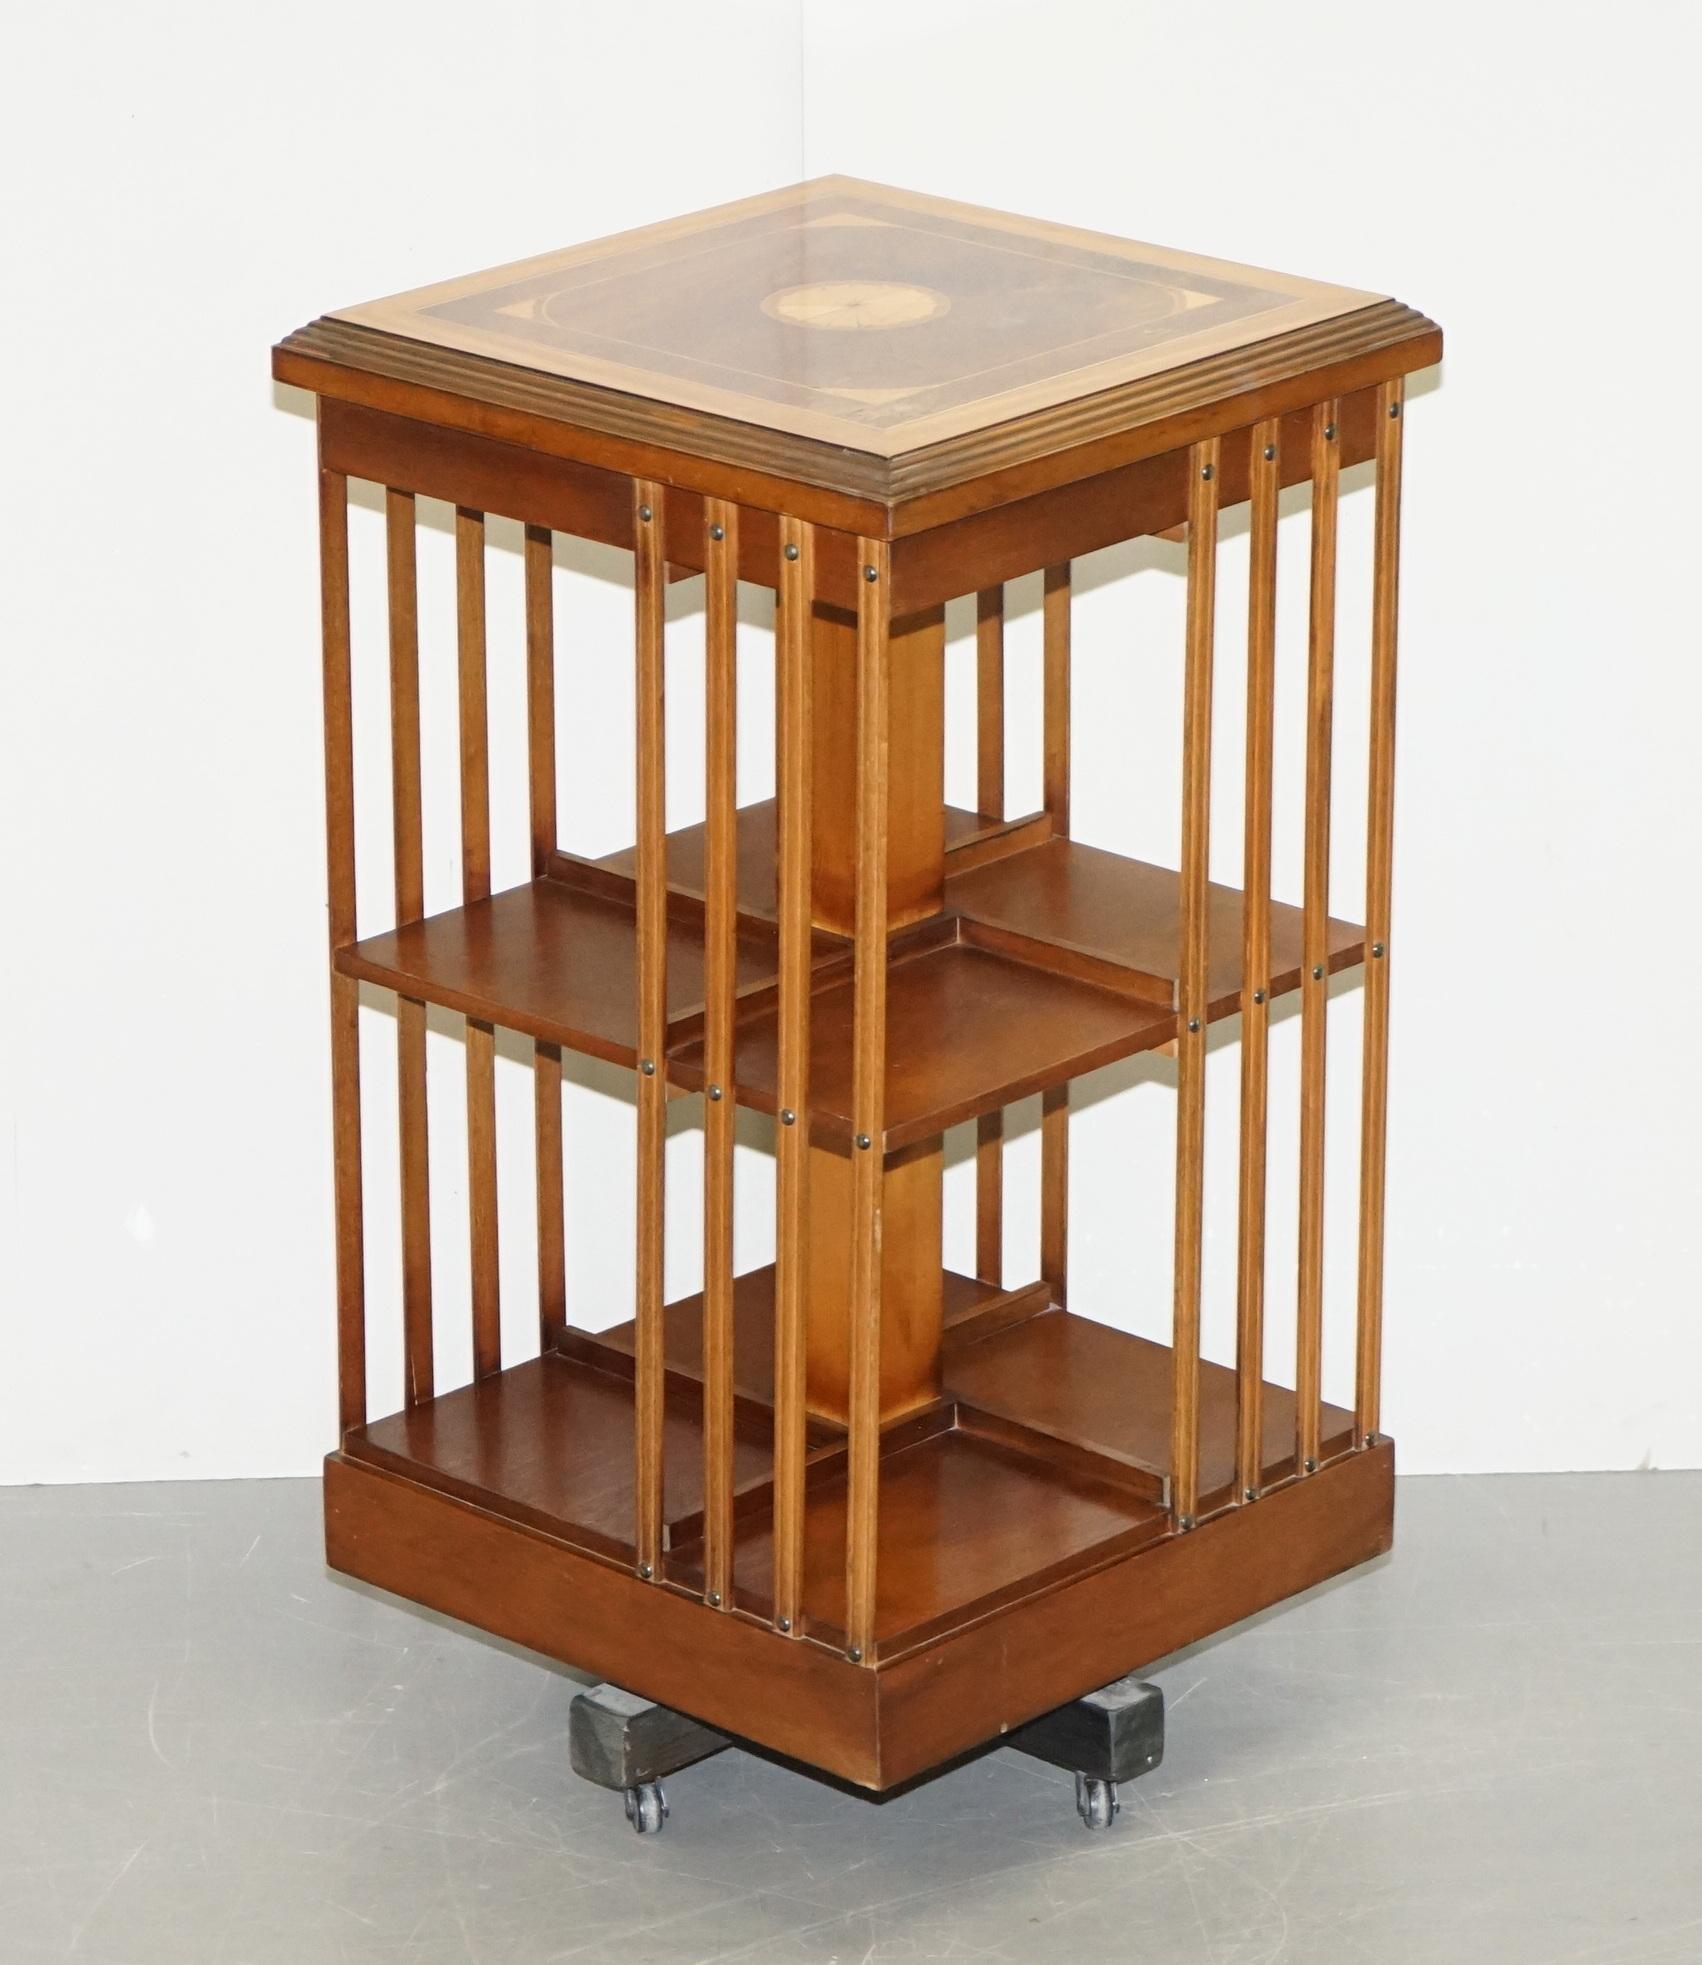 We are delighted to offer for sale this stunning circa 1900 burr walnut and satinwood revolving bookcase with Sheraton inlay to the top

An exceptionally well made and highly decorative library bookcase. This is a very versatile piece of furniture